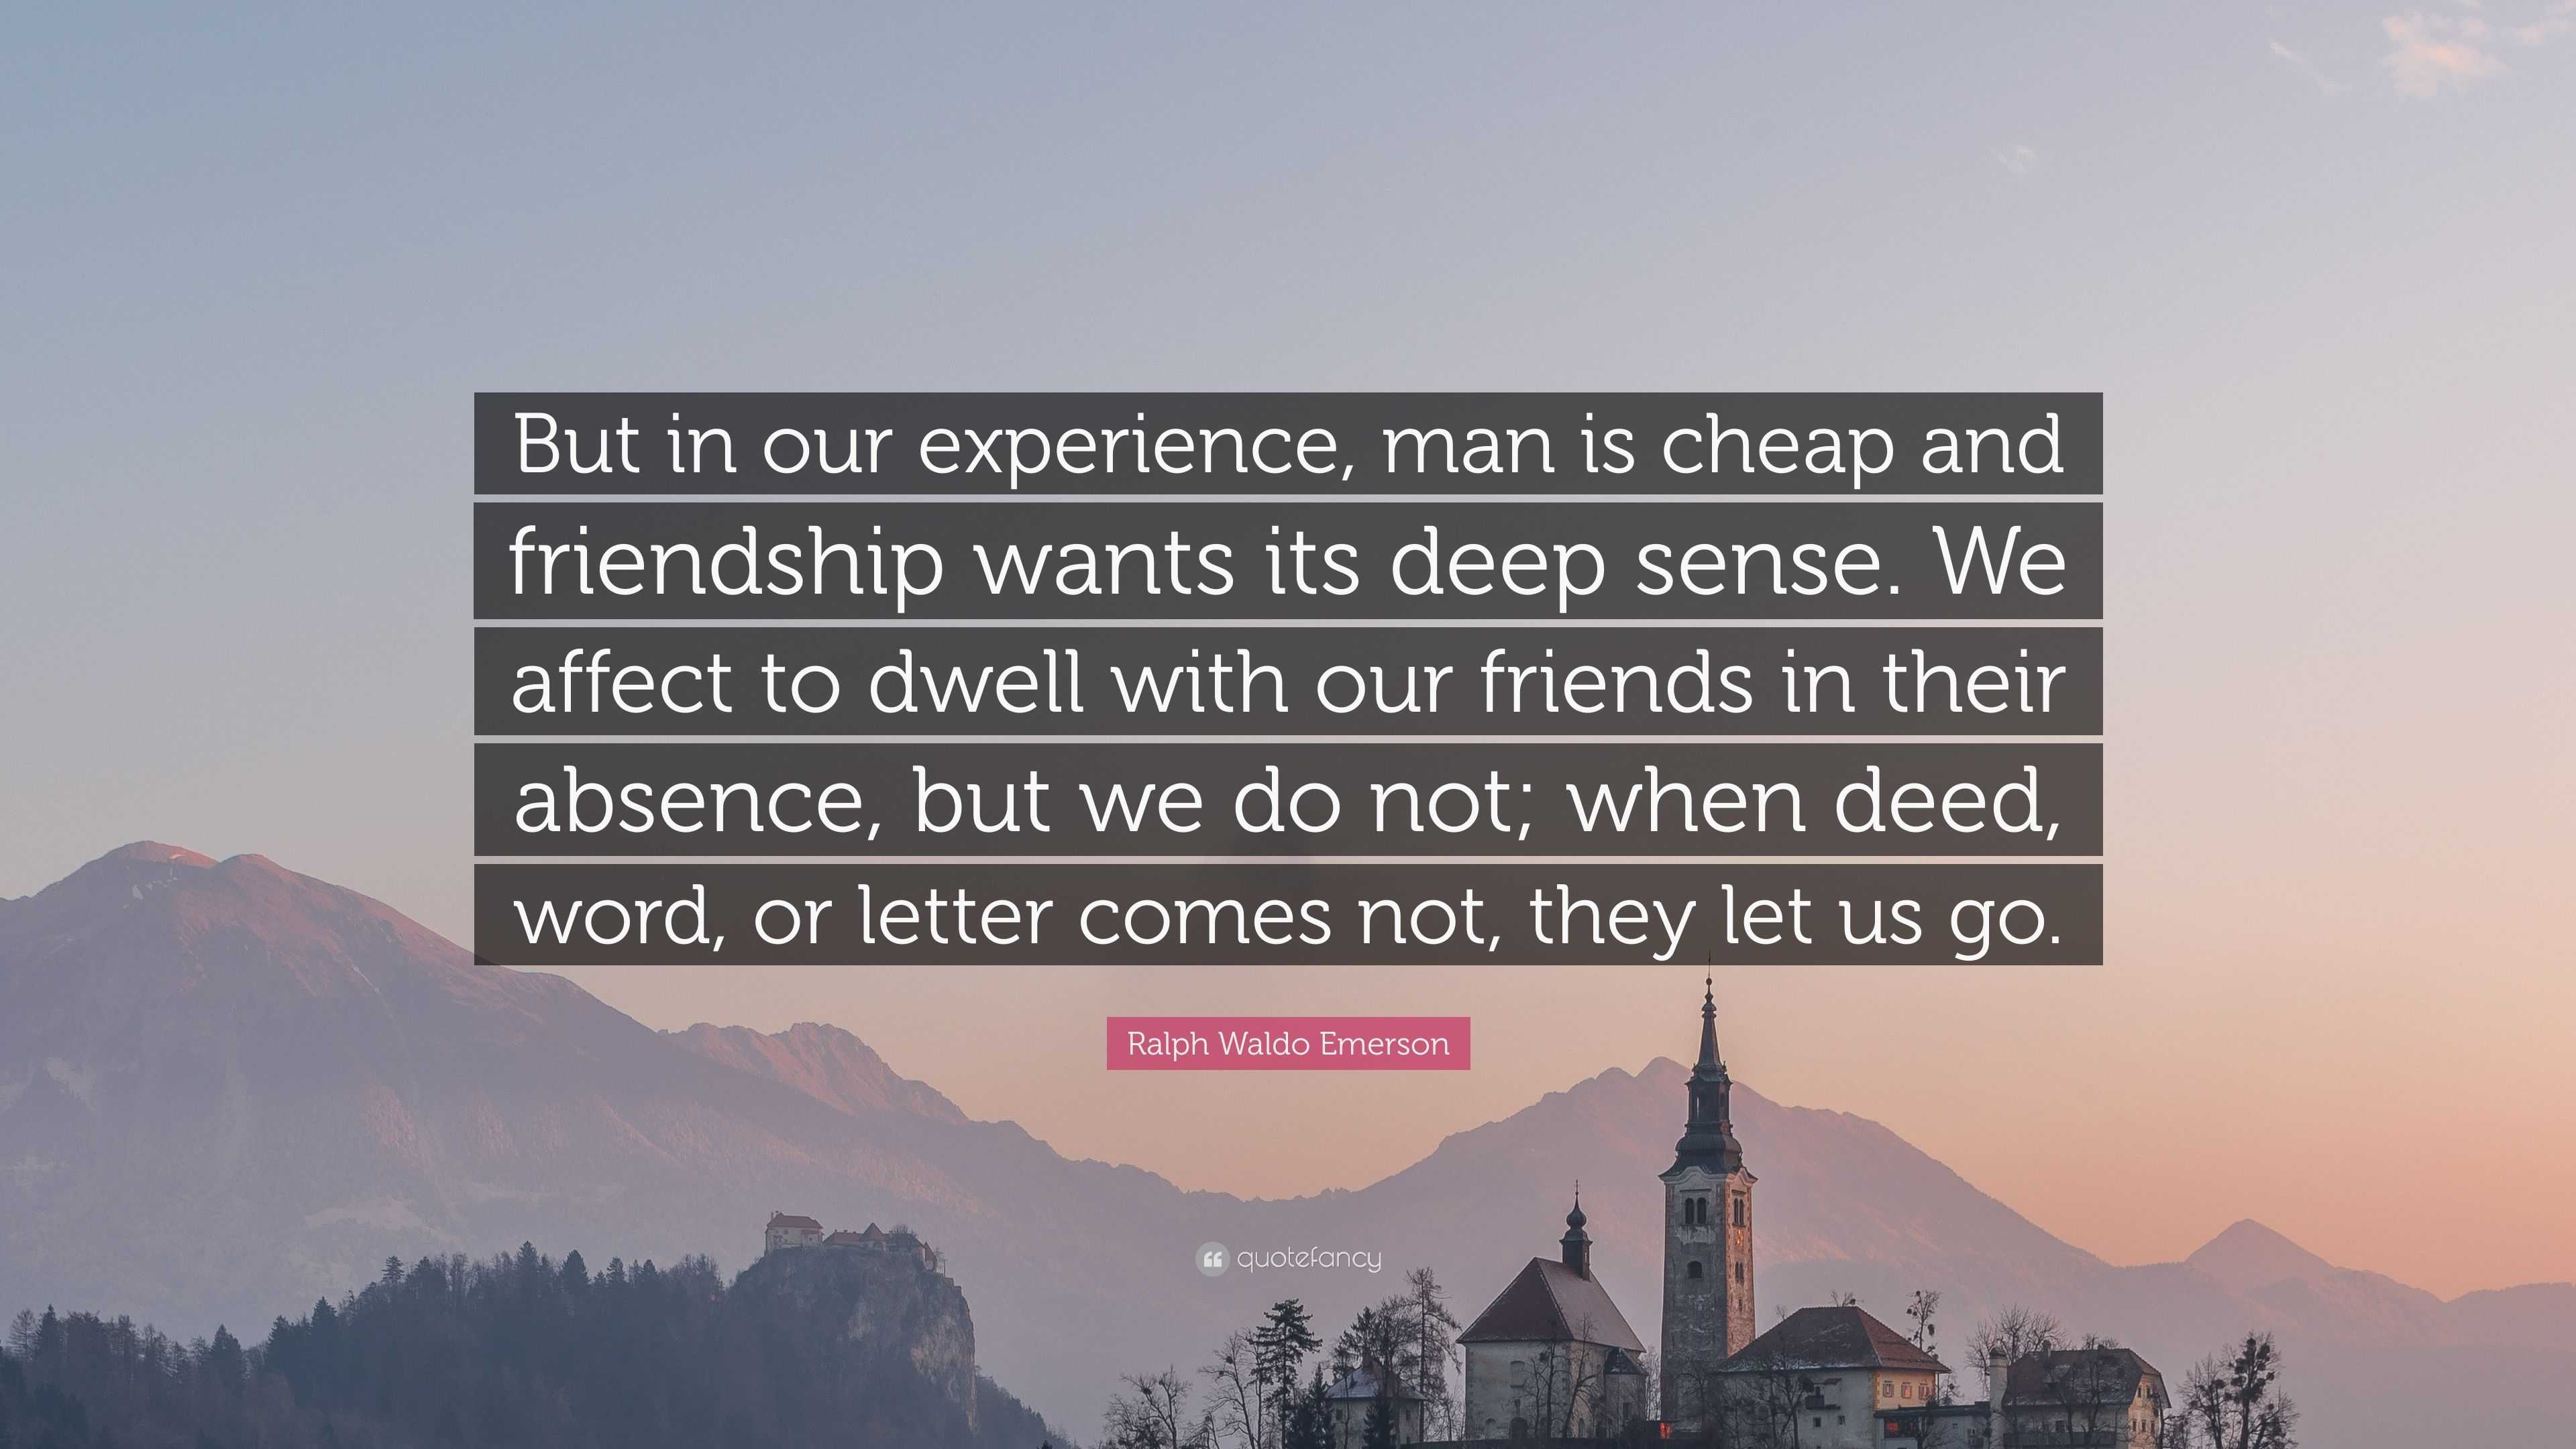 Ralph Waldo Emerson Quote: “But in our experience, man is cheap and